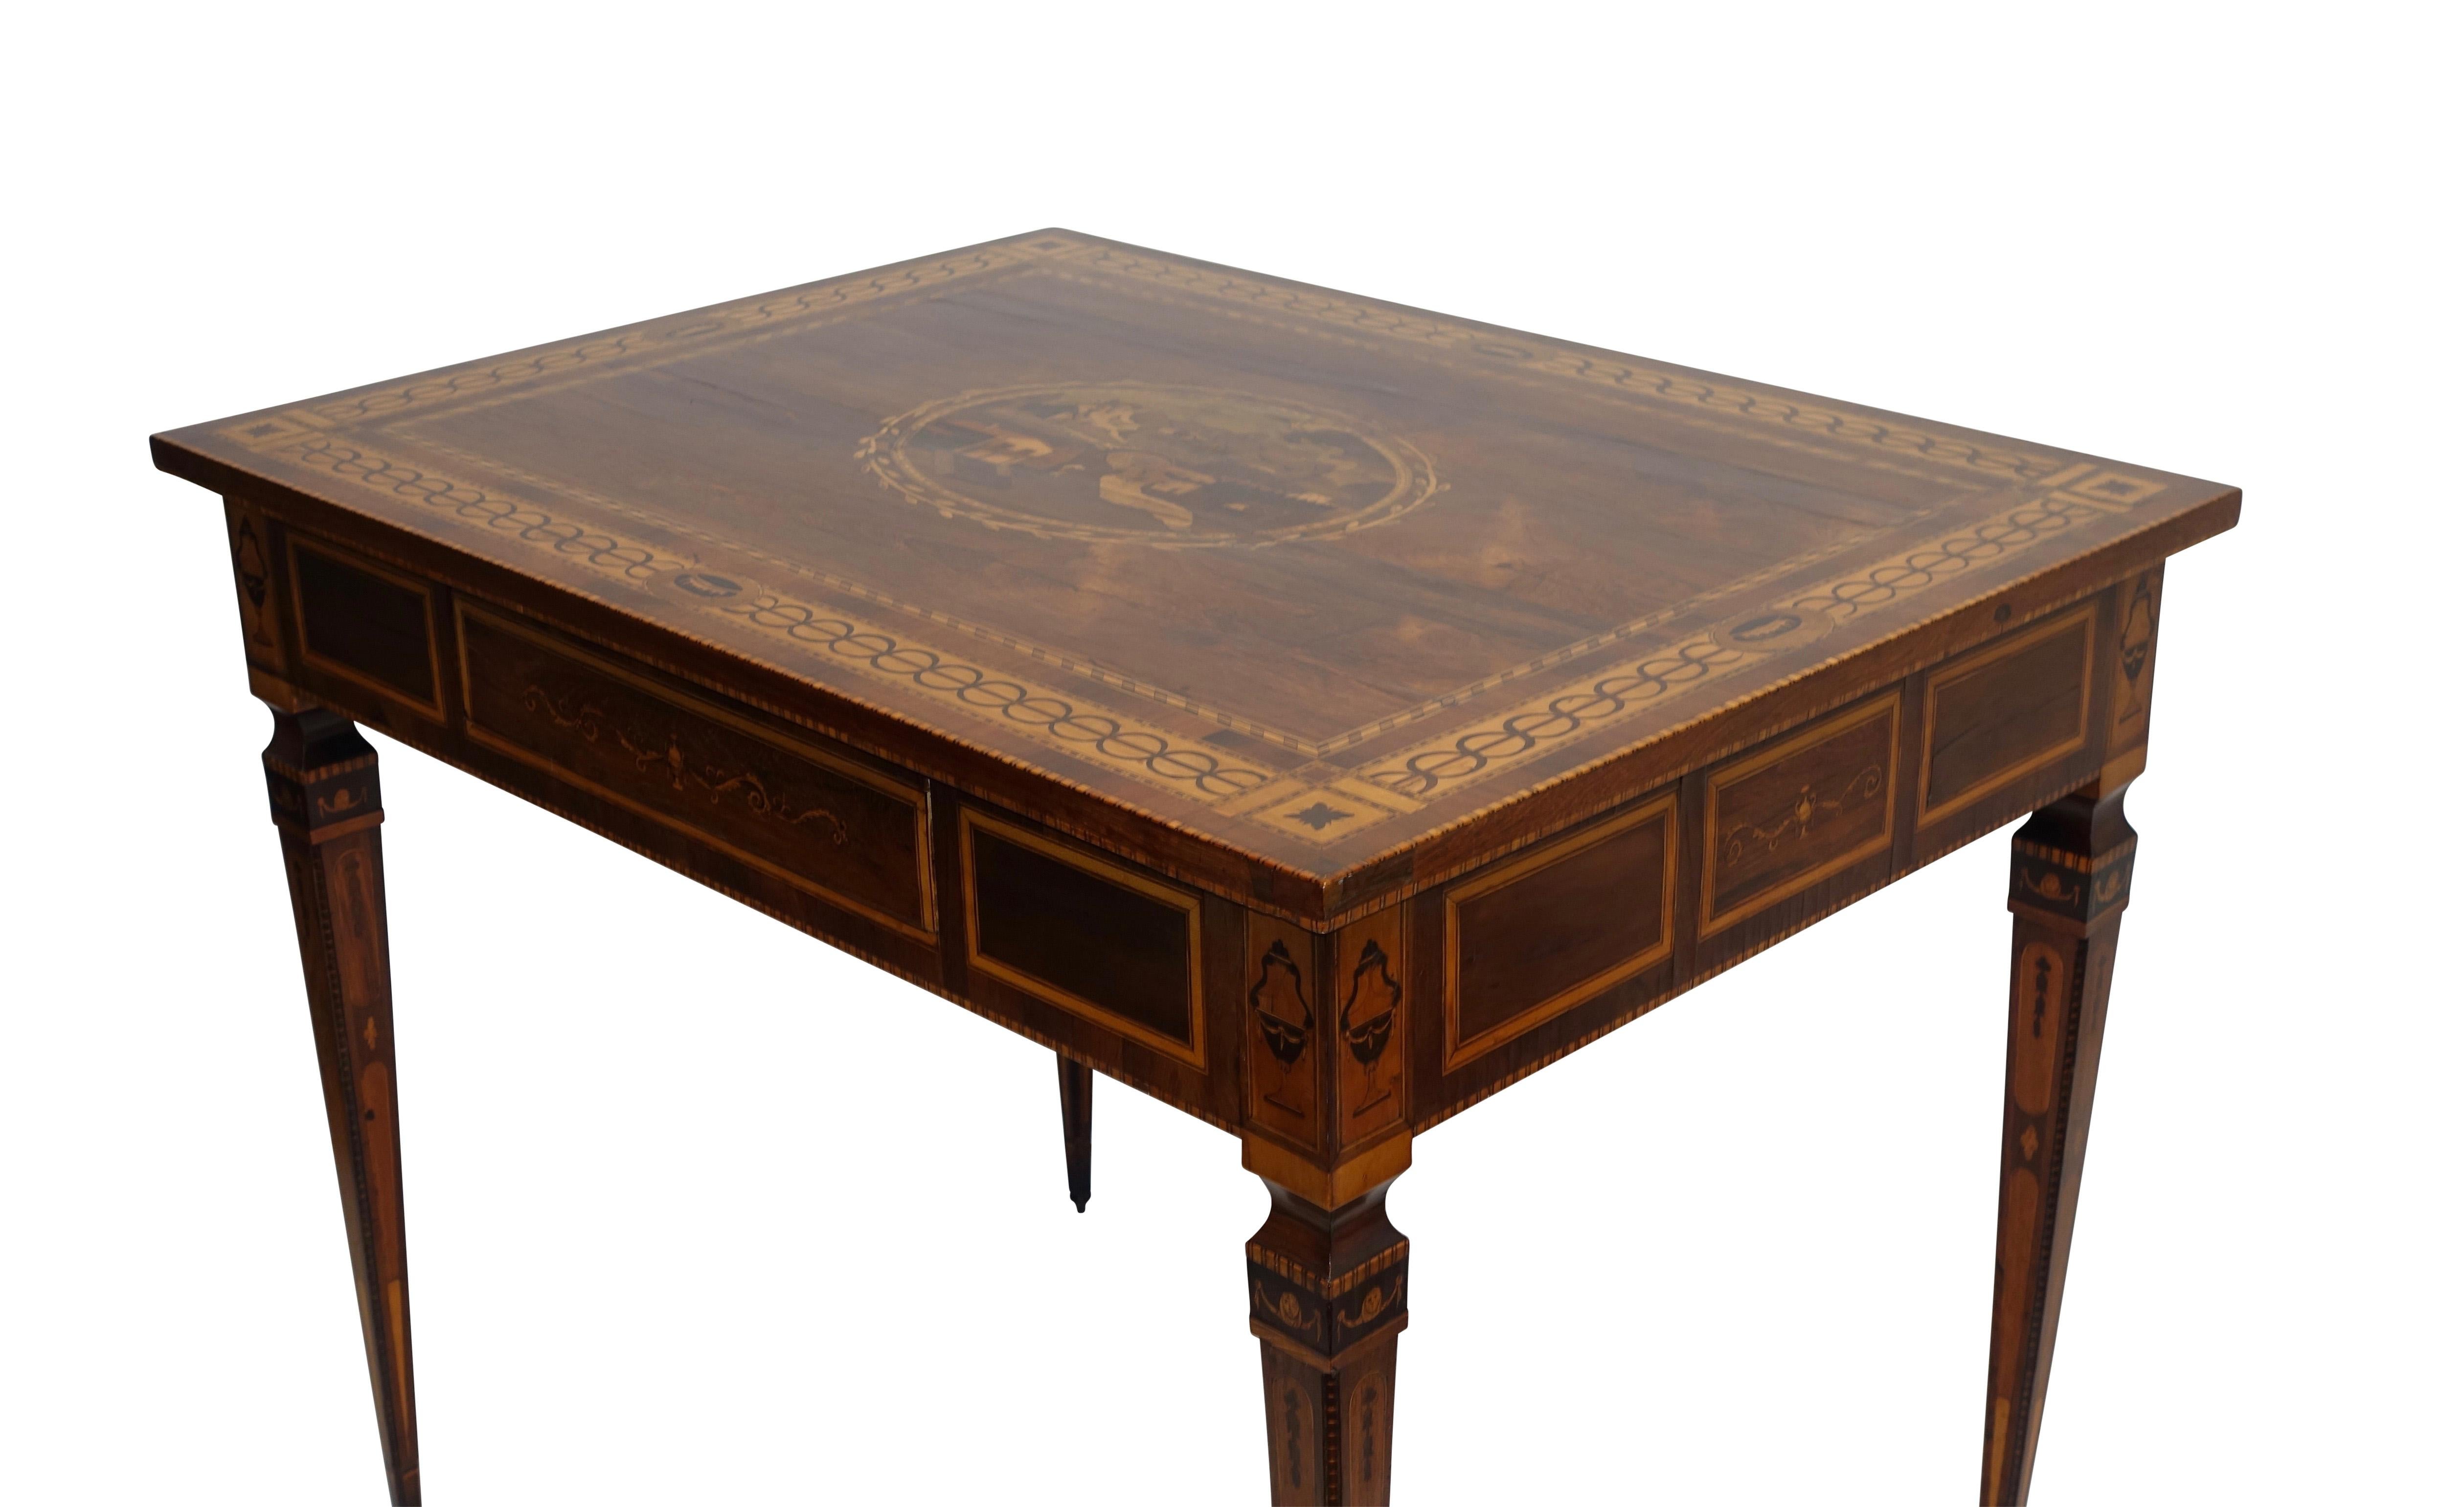 Mixed Woods Marquetry Inlaid Writing Table, Northern Italian, Late 18th Century For Sale 8